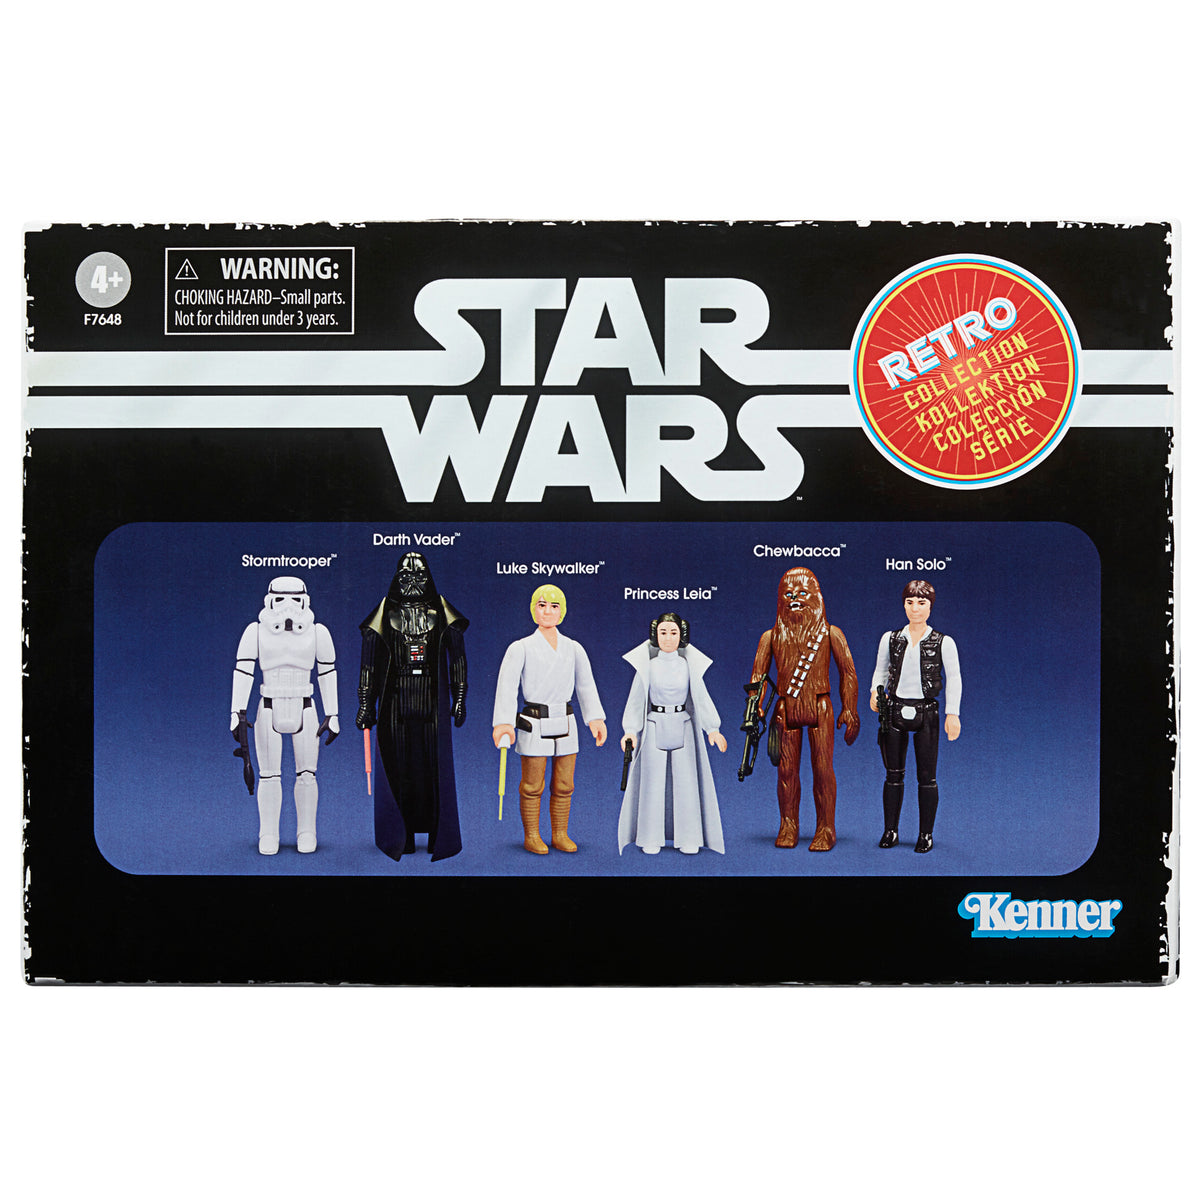 kolonie pen kortademigheid Star Wars Retro Collection Star Wars: A New Hope Collectible Multipack –  Hasbro Pulse